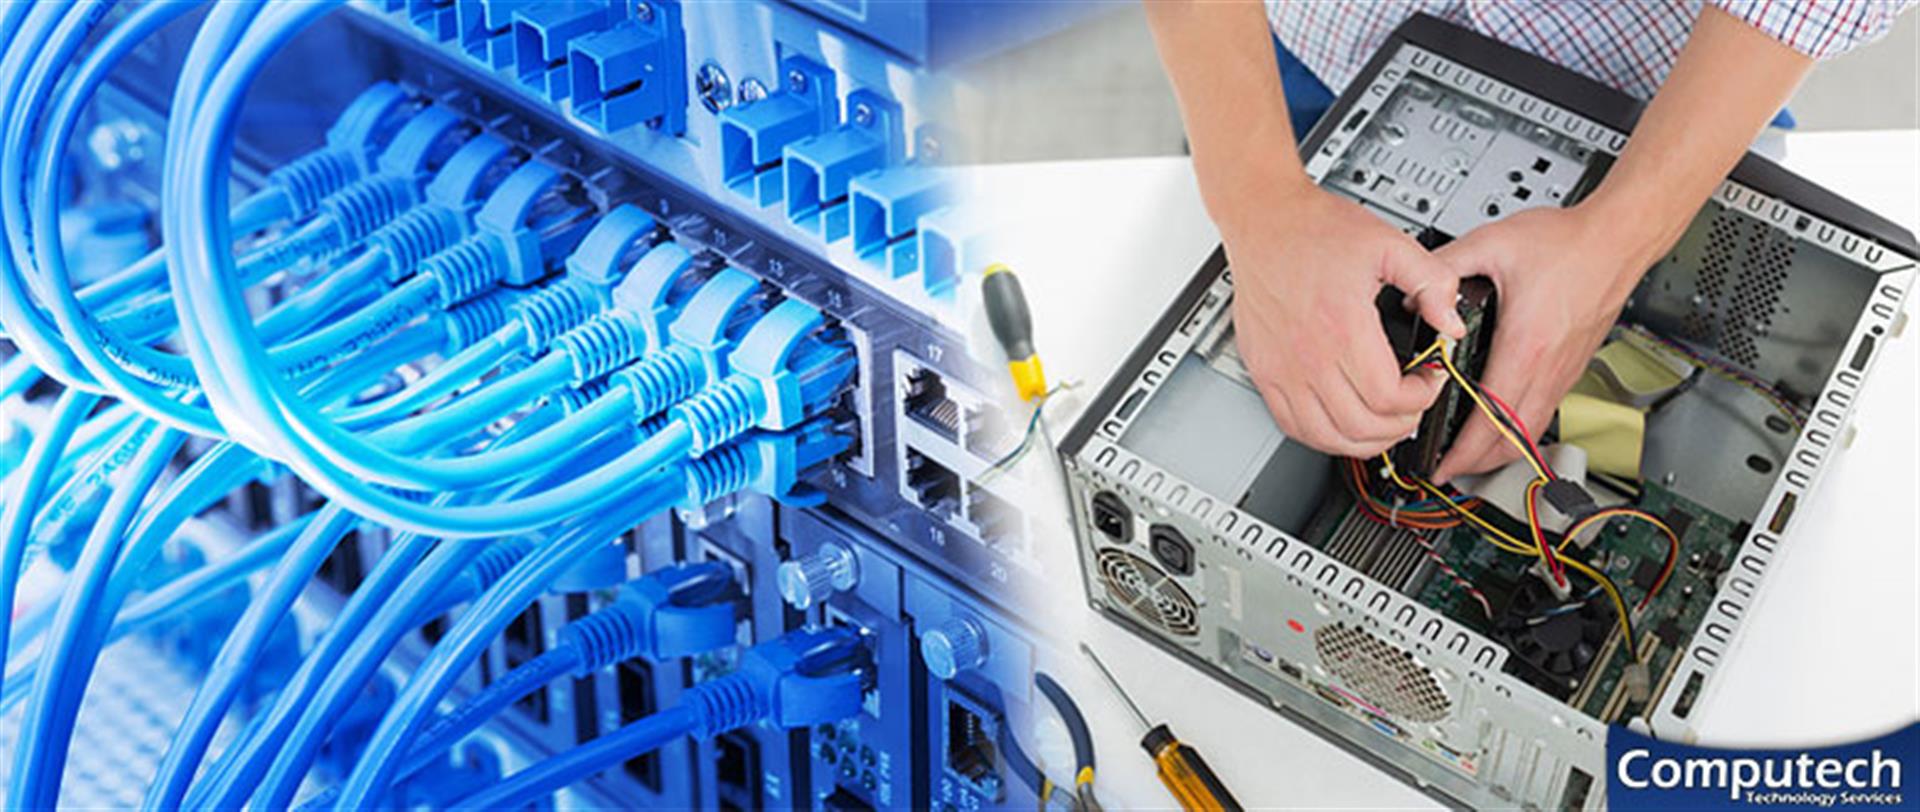 Mosheim Tennessee On-Site PC and Printer Repairs, Networking, Voice & Data Cabling Solutions